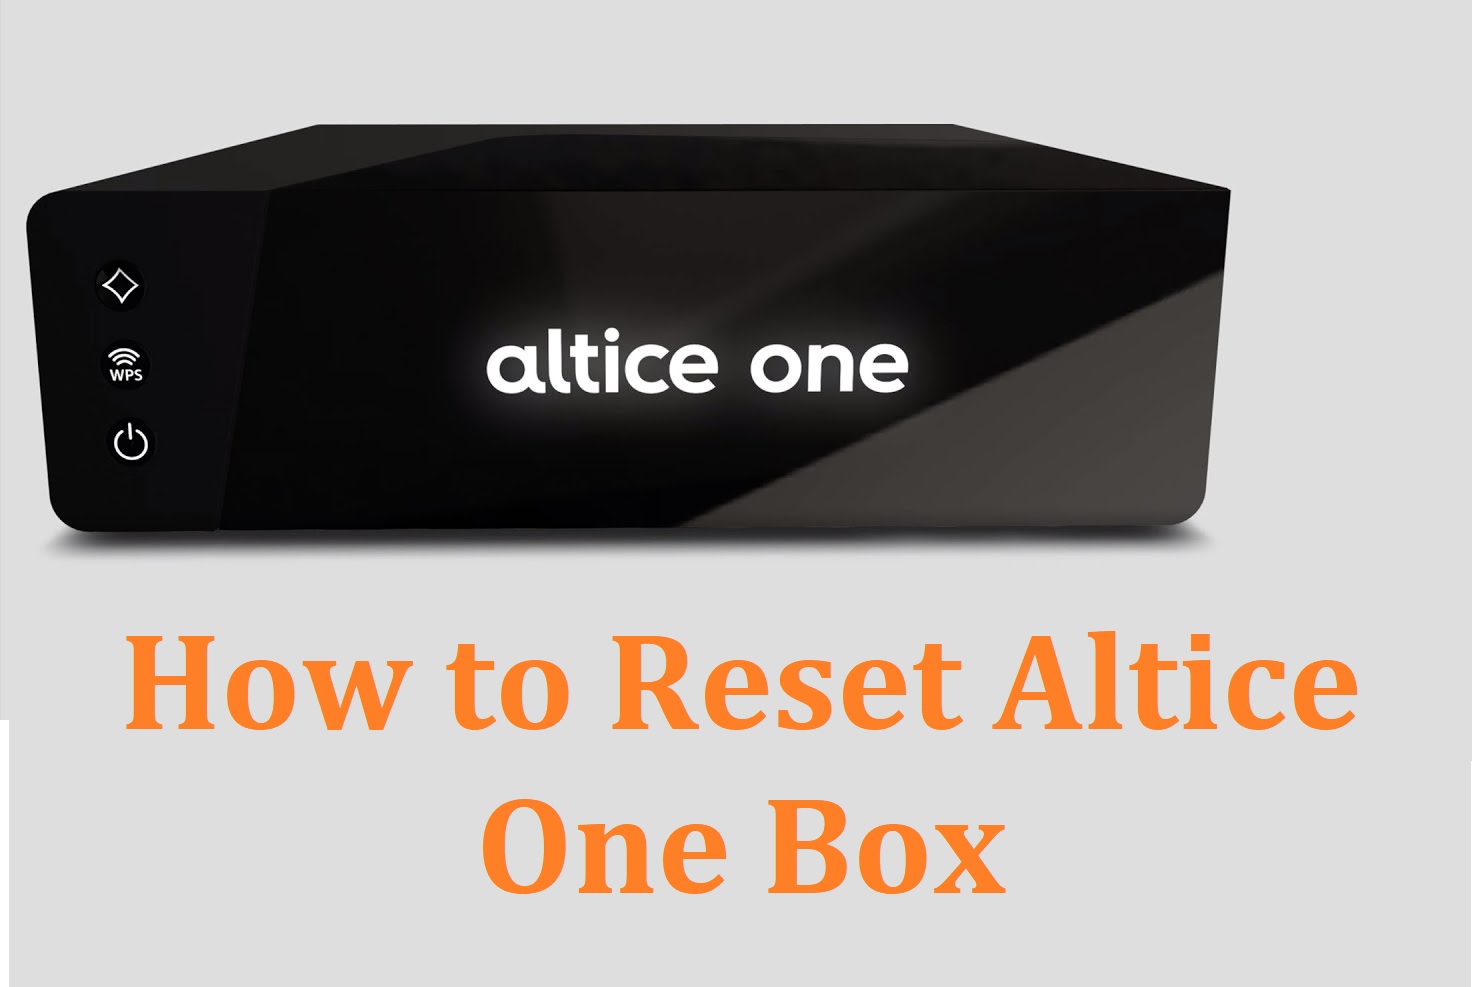 altice one mini box not working